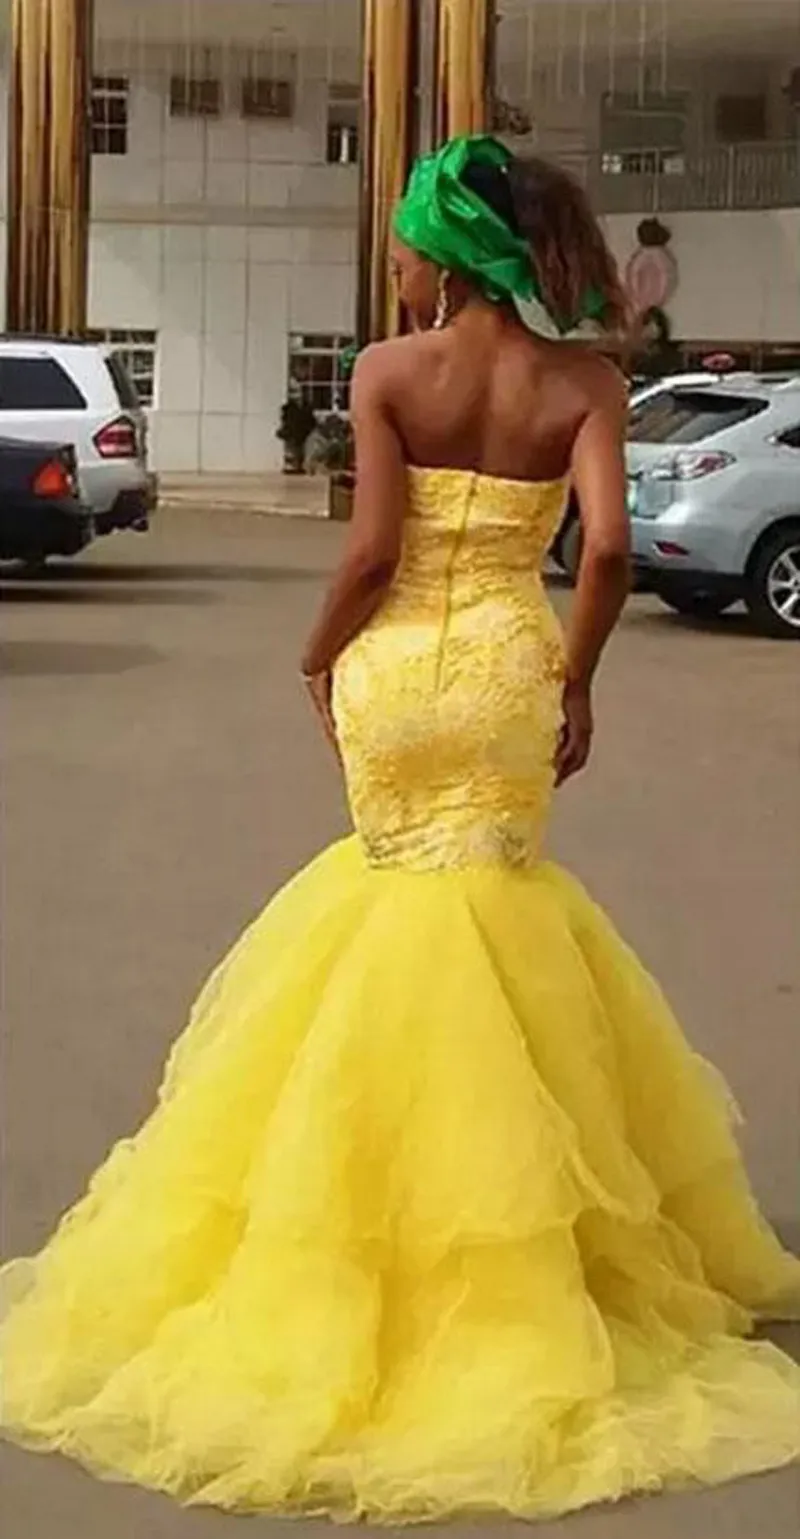 2018 Africa New Lace Yellow Prom Dresses Sweetheart Beads South Africa Mermaid Evening Gowns Miss Pageant Dress 2017 Vestidos De Party Gown